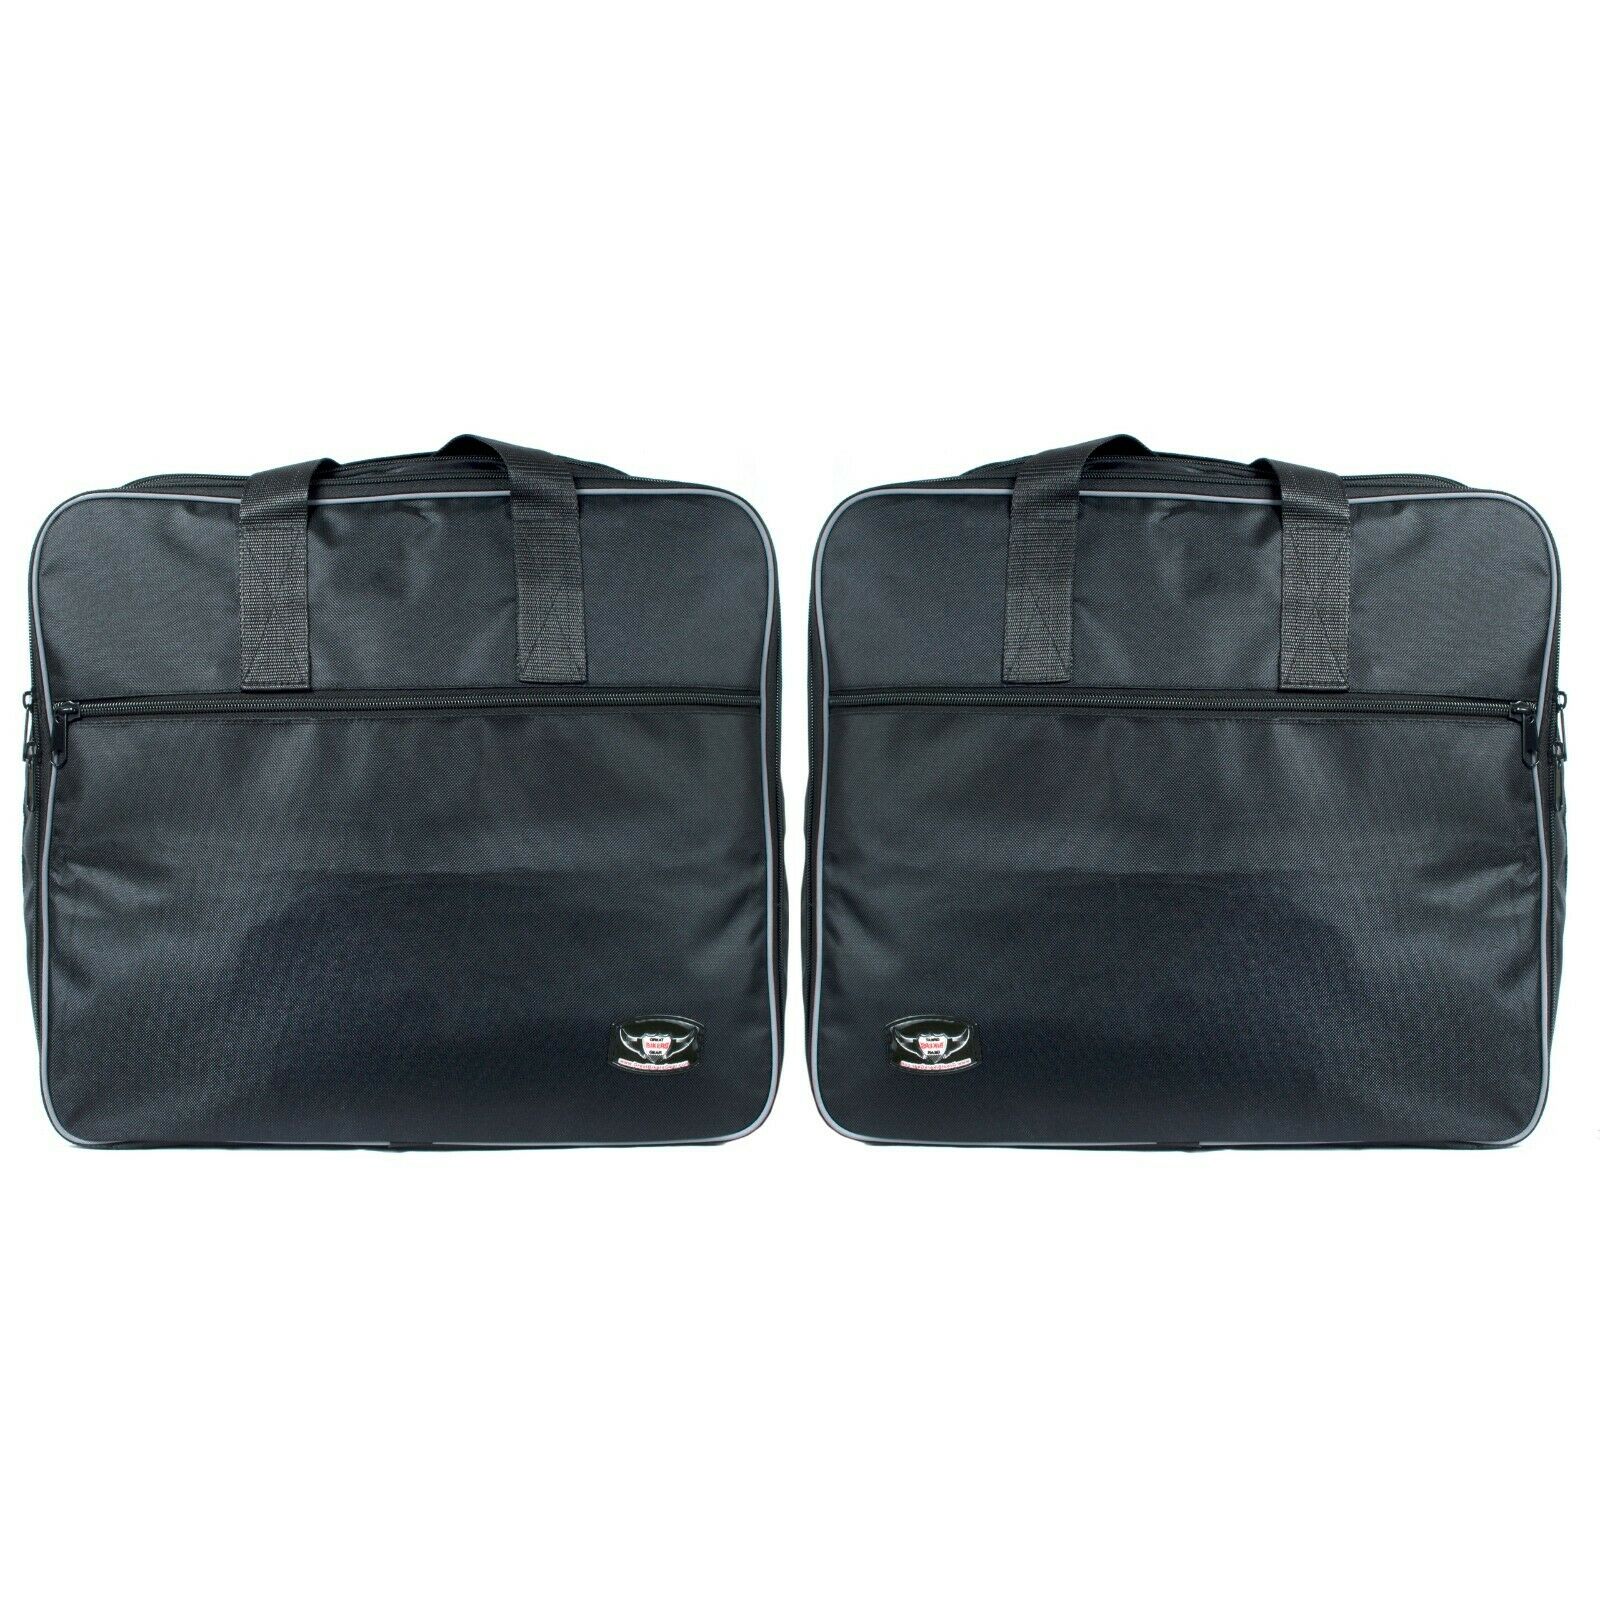 GREAT BIKERS GEAR 1 Pair Of Pannier Liner Bags To Fit BMW R1200RT Panniers In Blue/Black Colour Expandable 